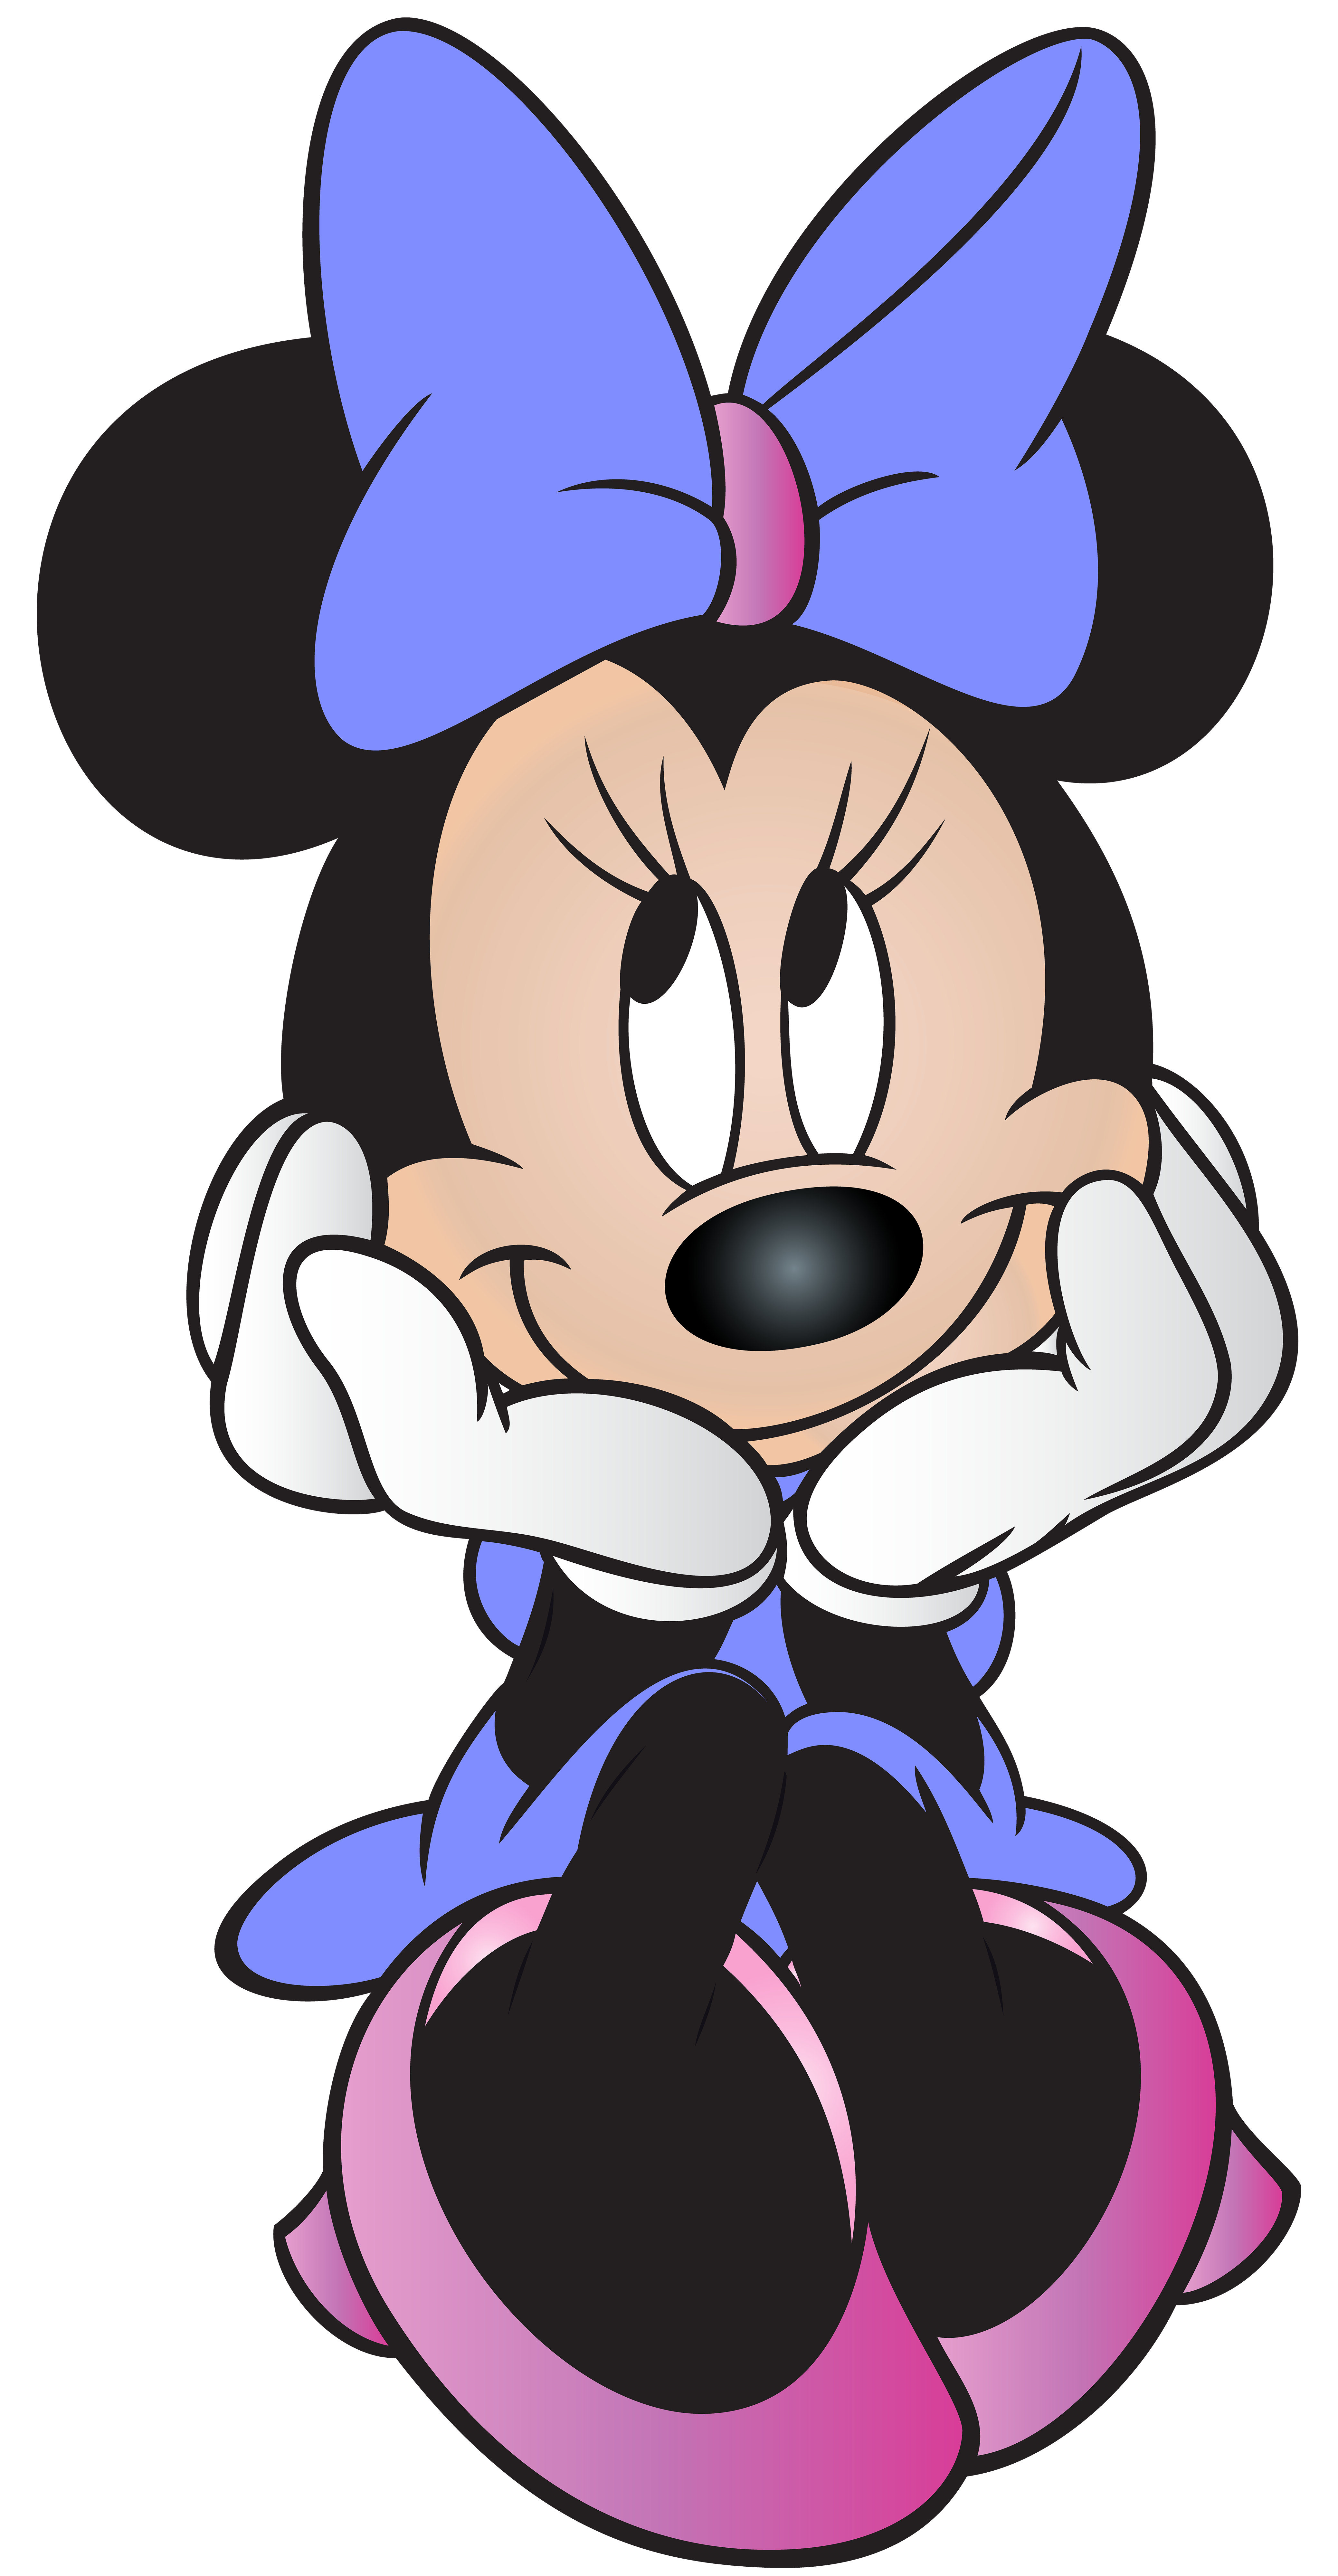 Minnie Mouse Free Clip Art PNG Image​ | Gallery Yopriceville - High-Quality  Free Images and Transparent PNG Clipart